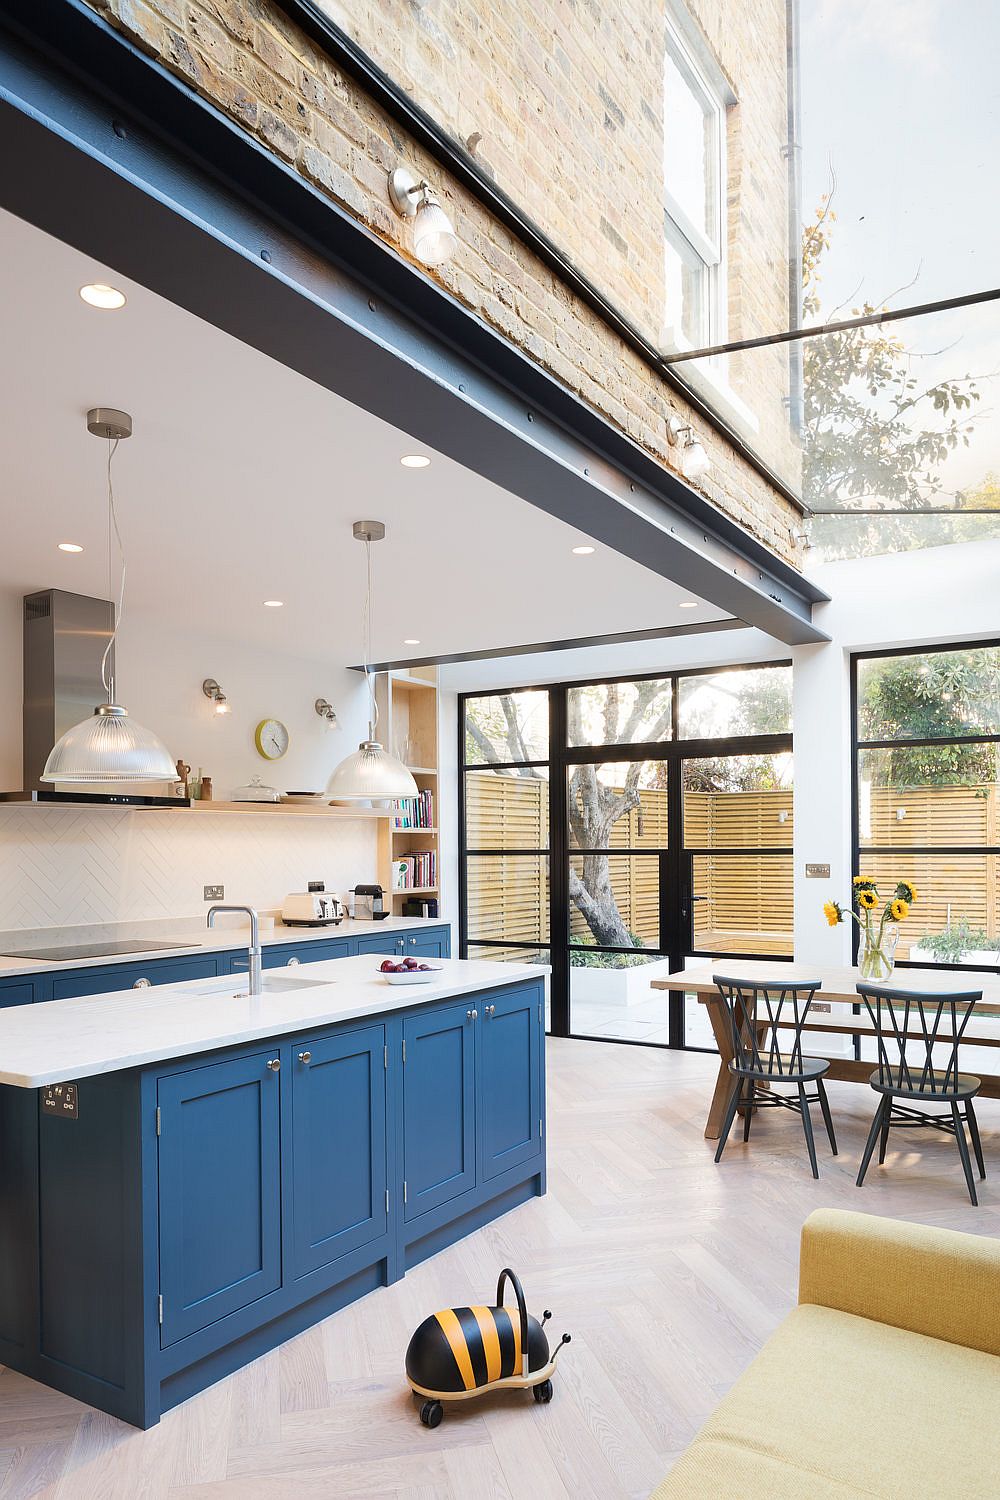 Large glass skylight fills the kitchen with natural light